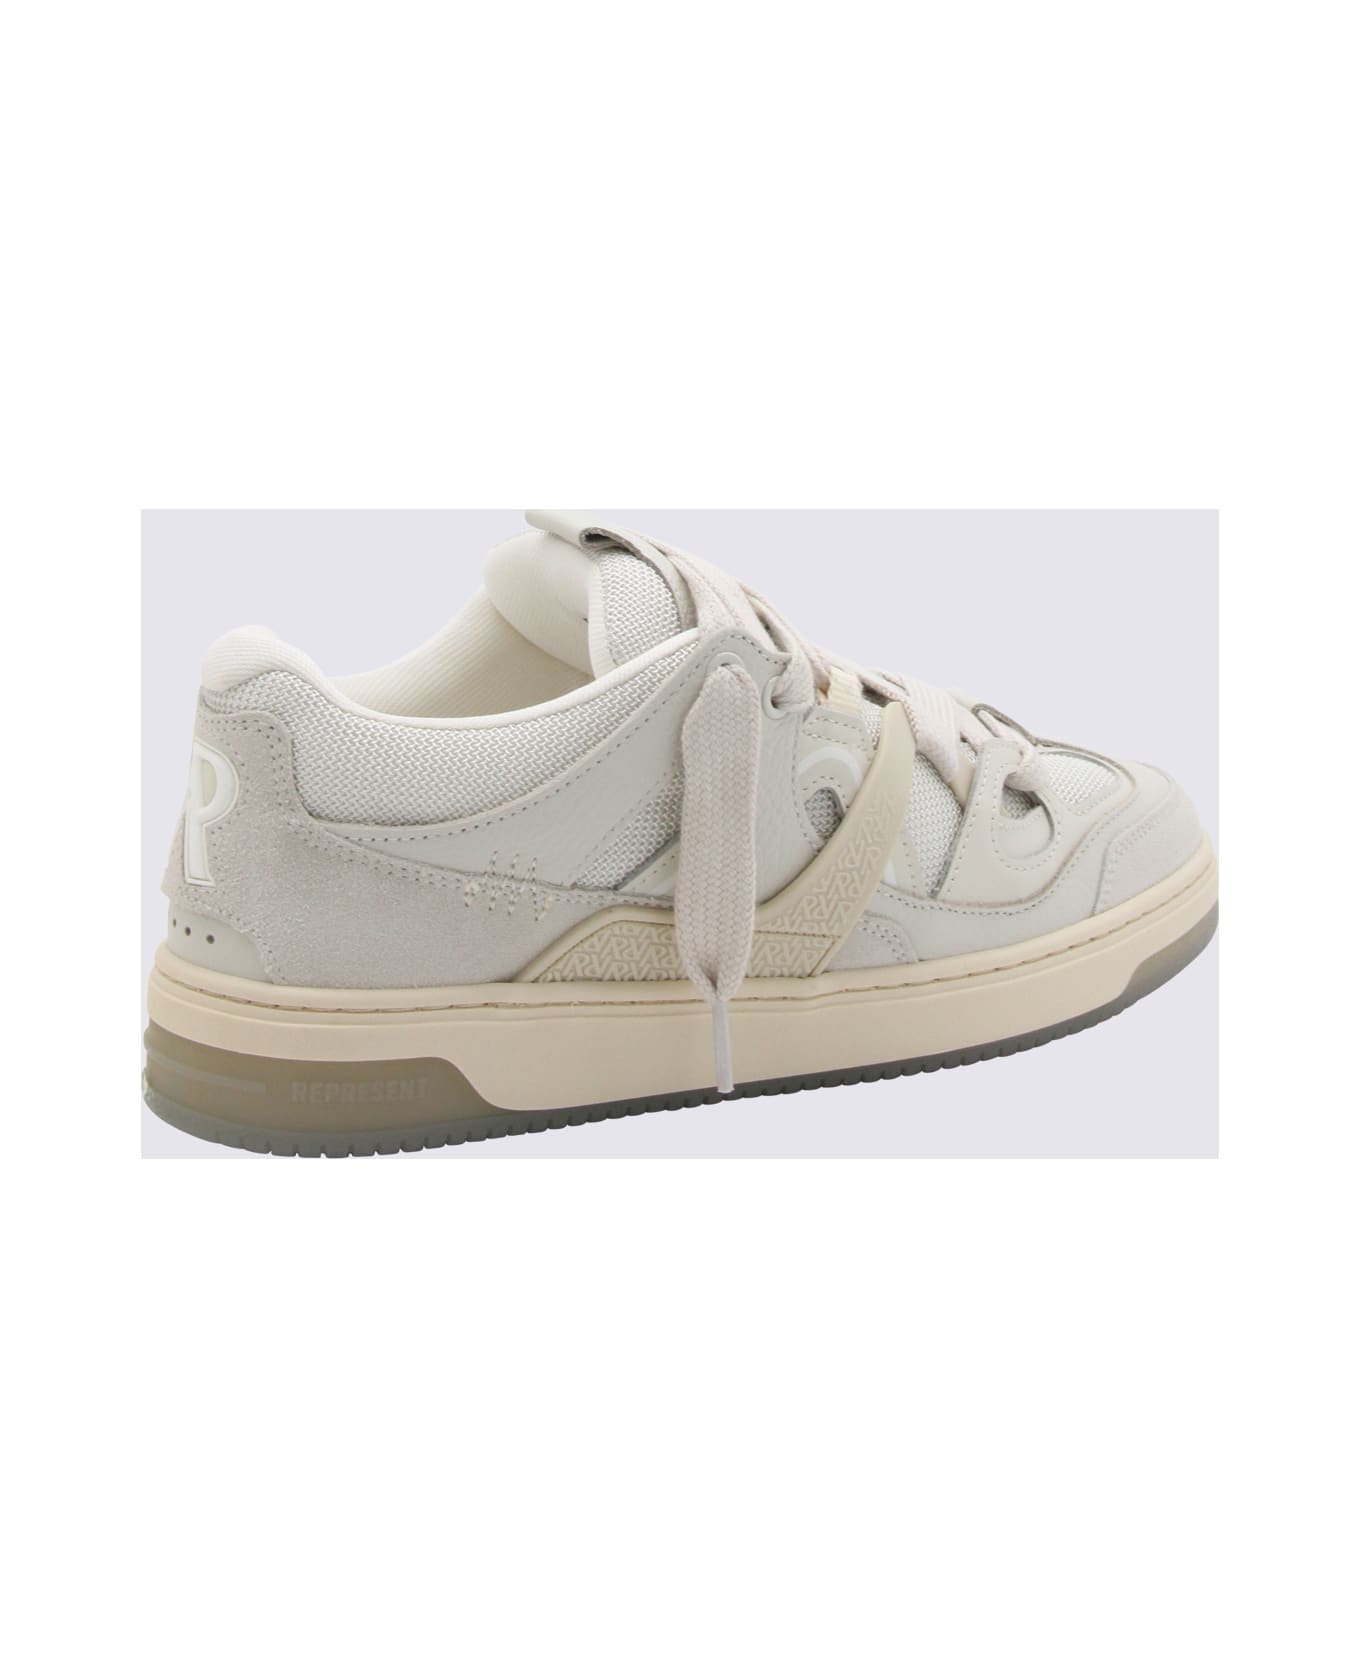 REPRESENT White Leather Sneakers - FLAT WHITE